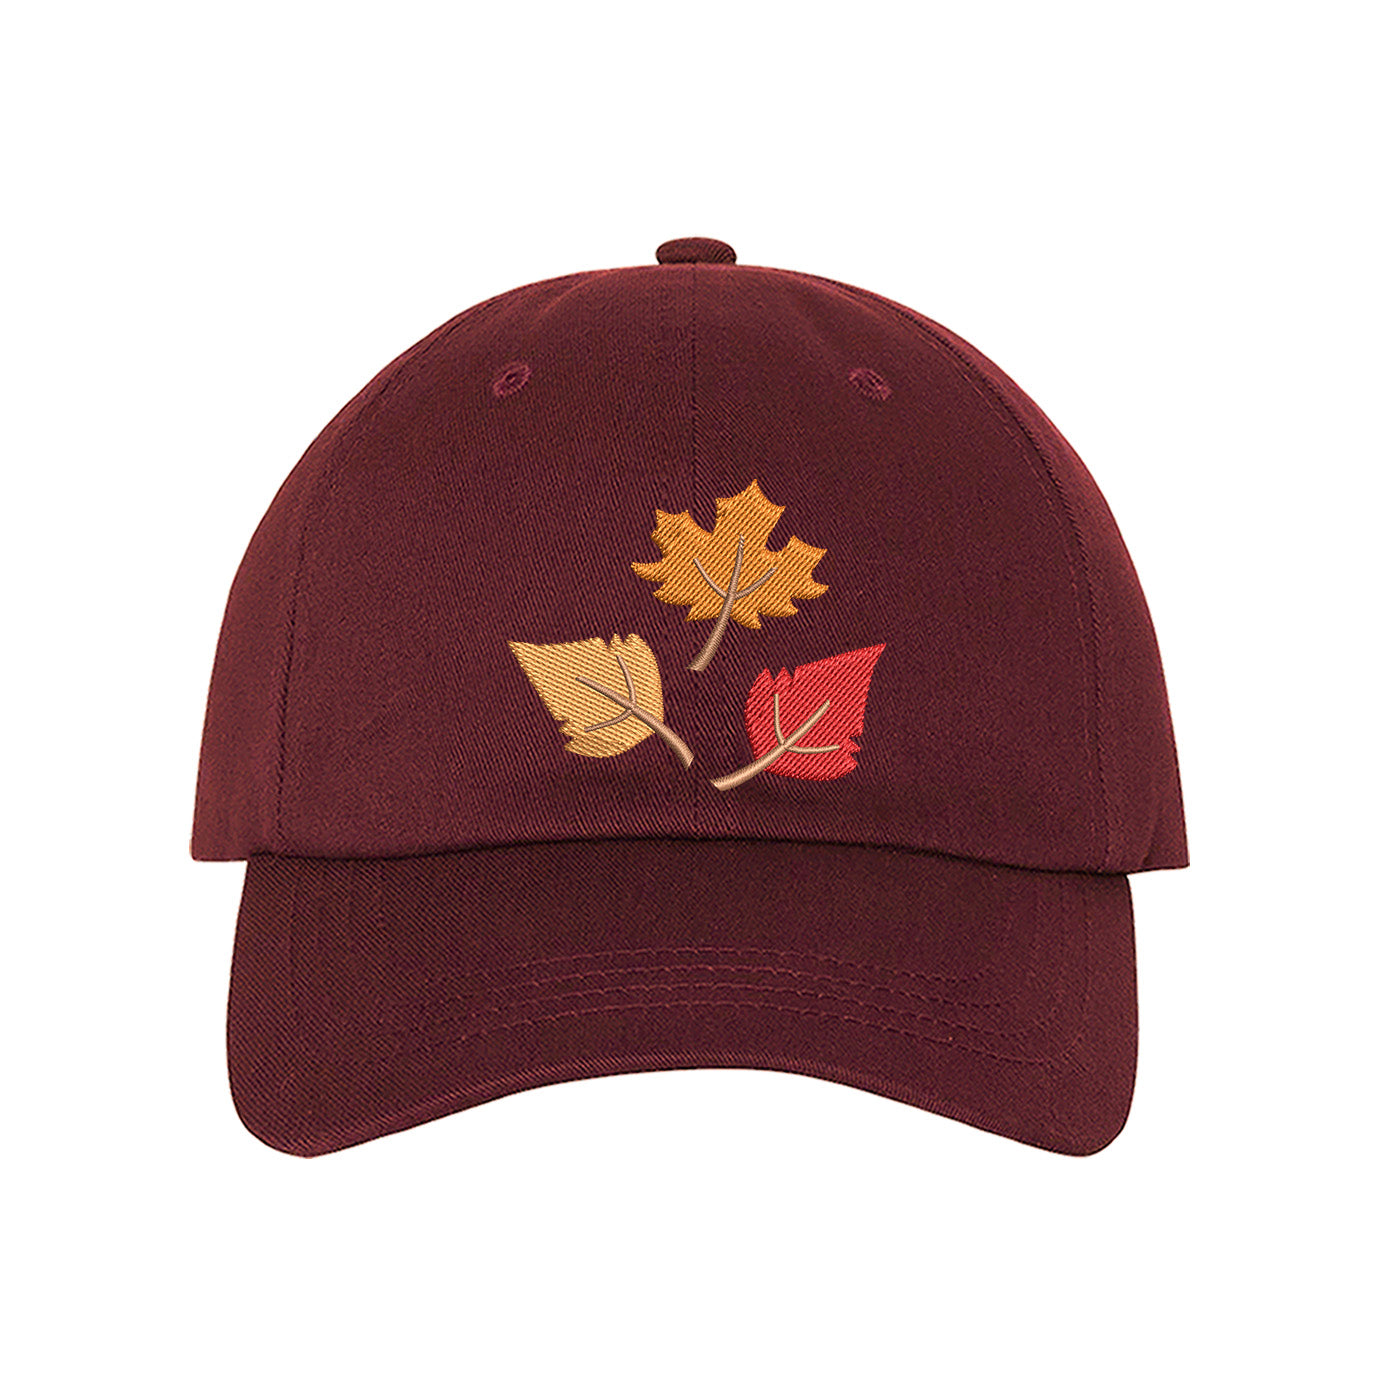 Burgundy baseball cap embroidered with Leaves - DSY Lifestyle